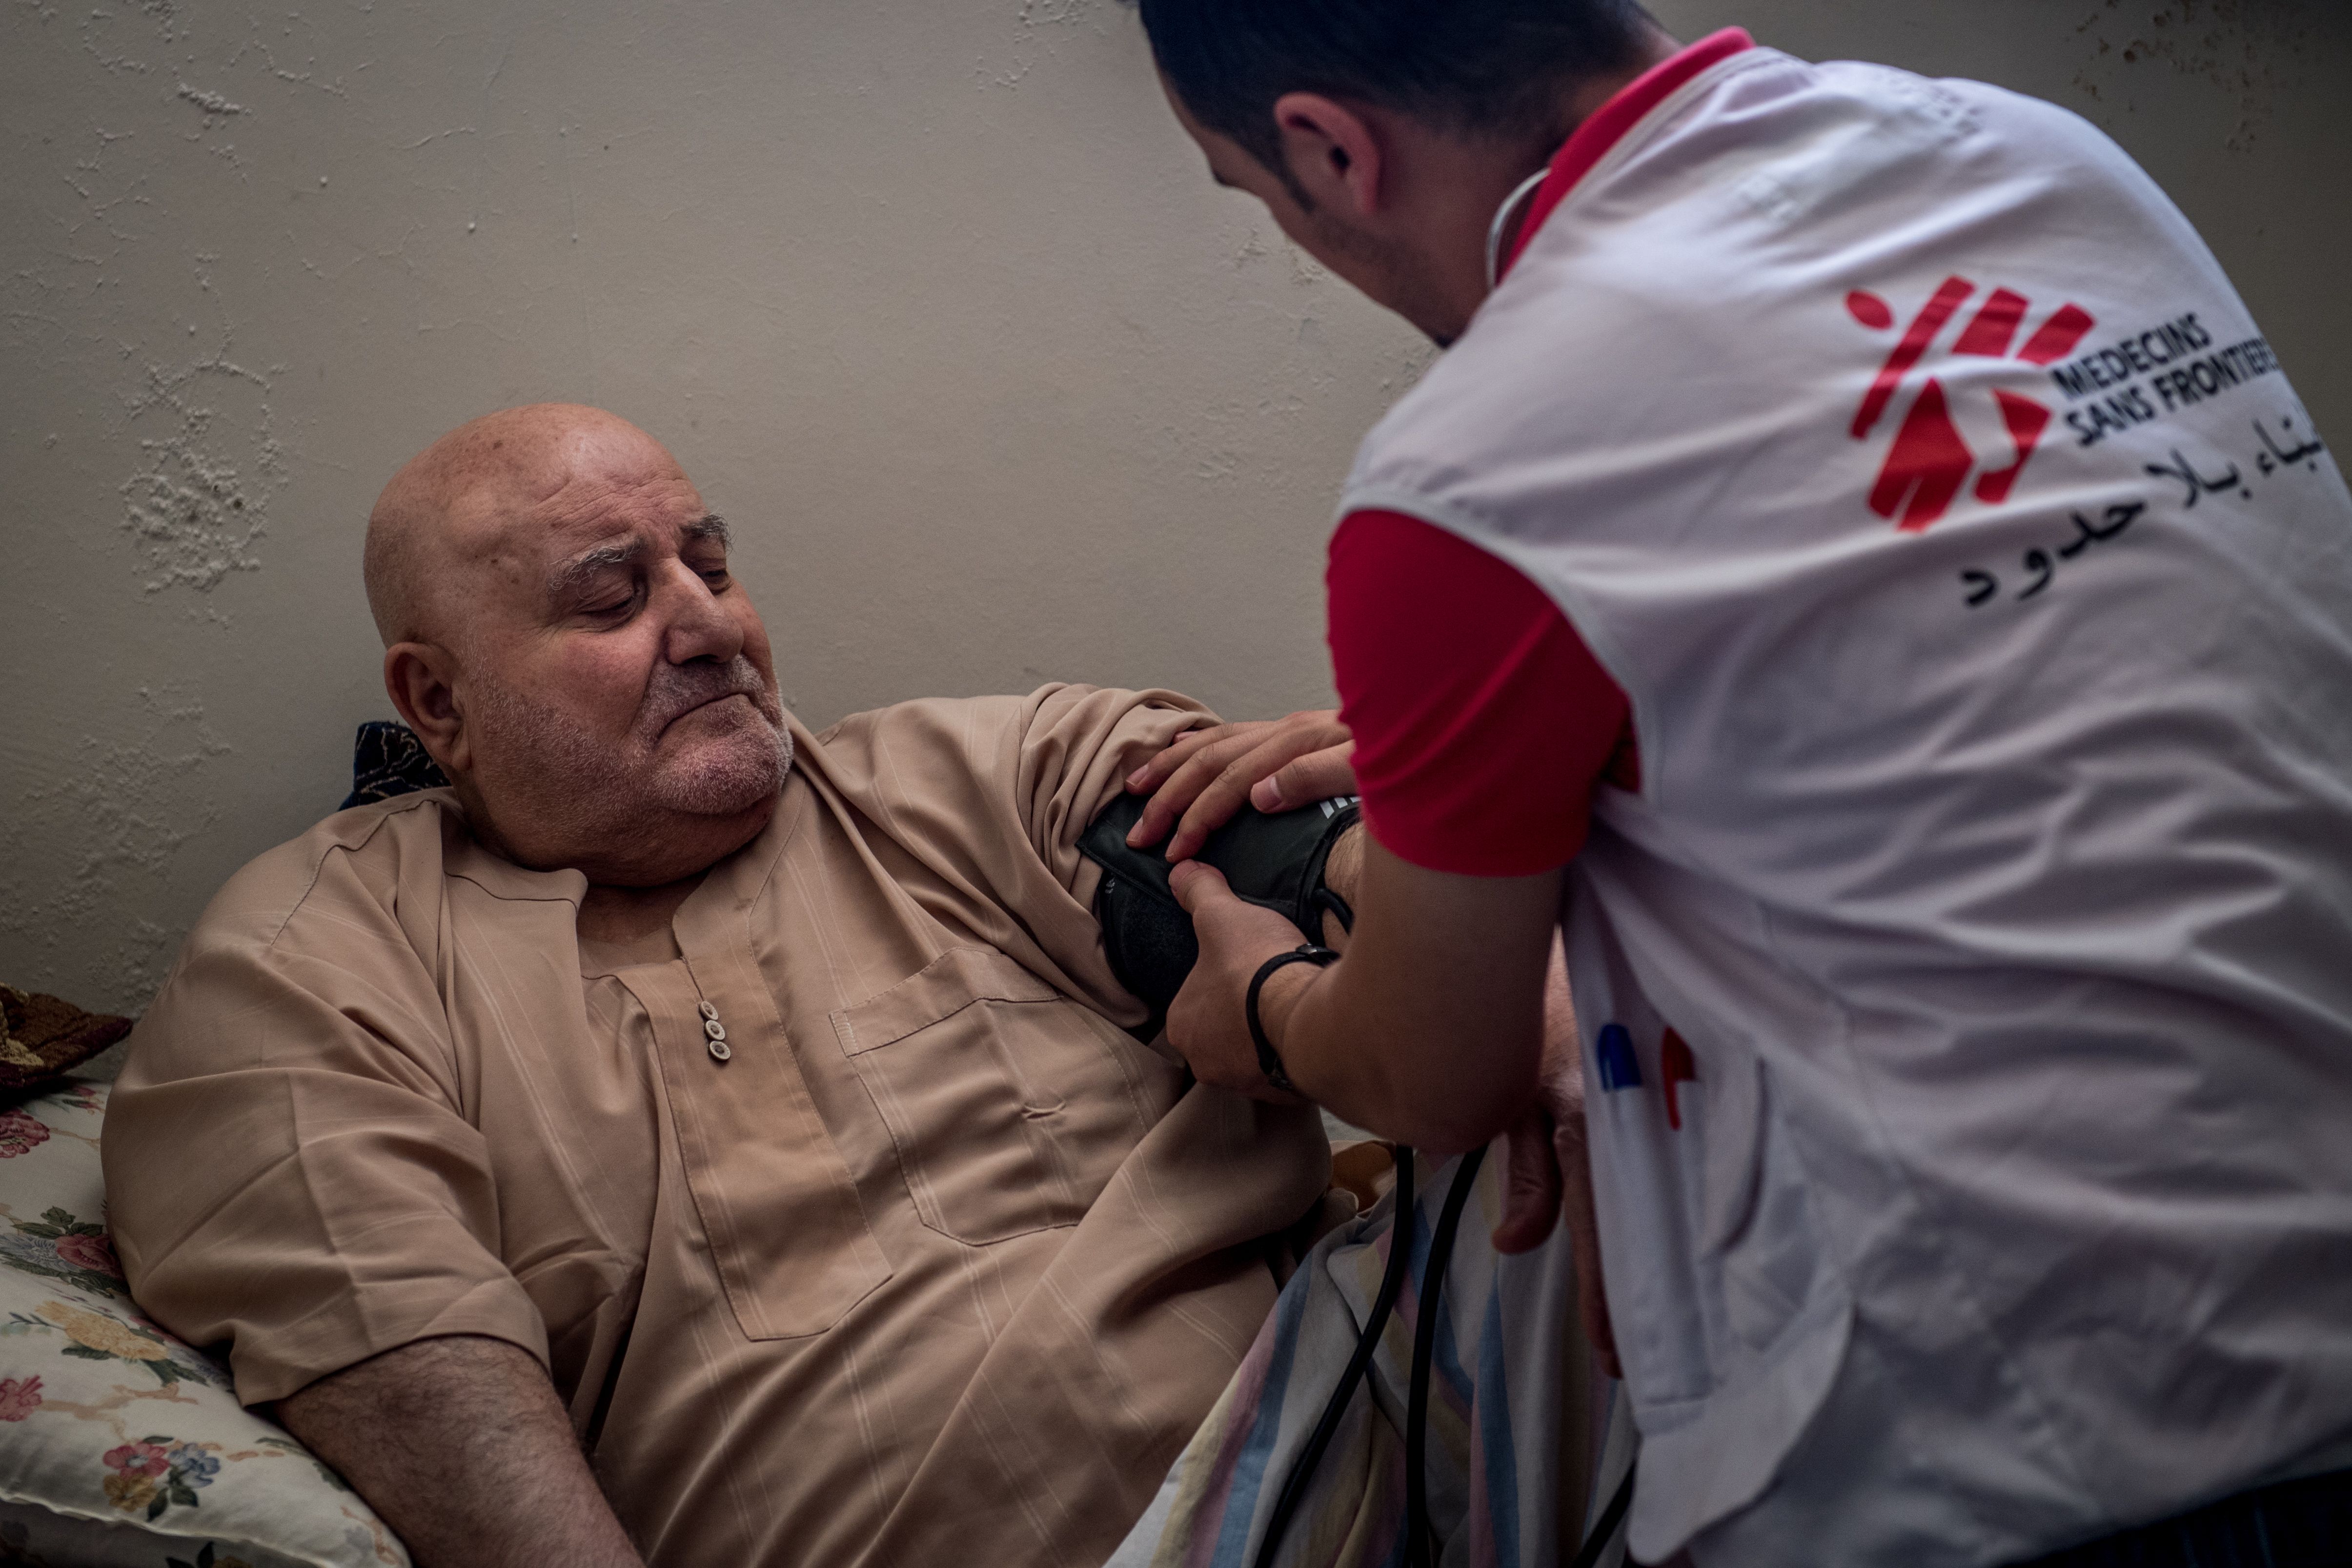 A physician checks on Ibrahim Hassan (left), who lives as a displaced person in Jordan after fleeing the regime in Syria. Image by Neil Brandvold. Jordan, 2017.